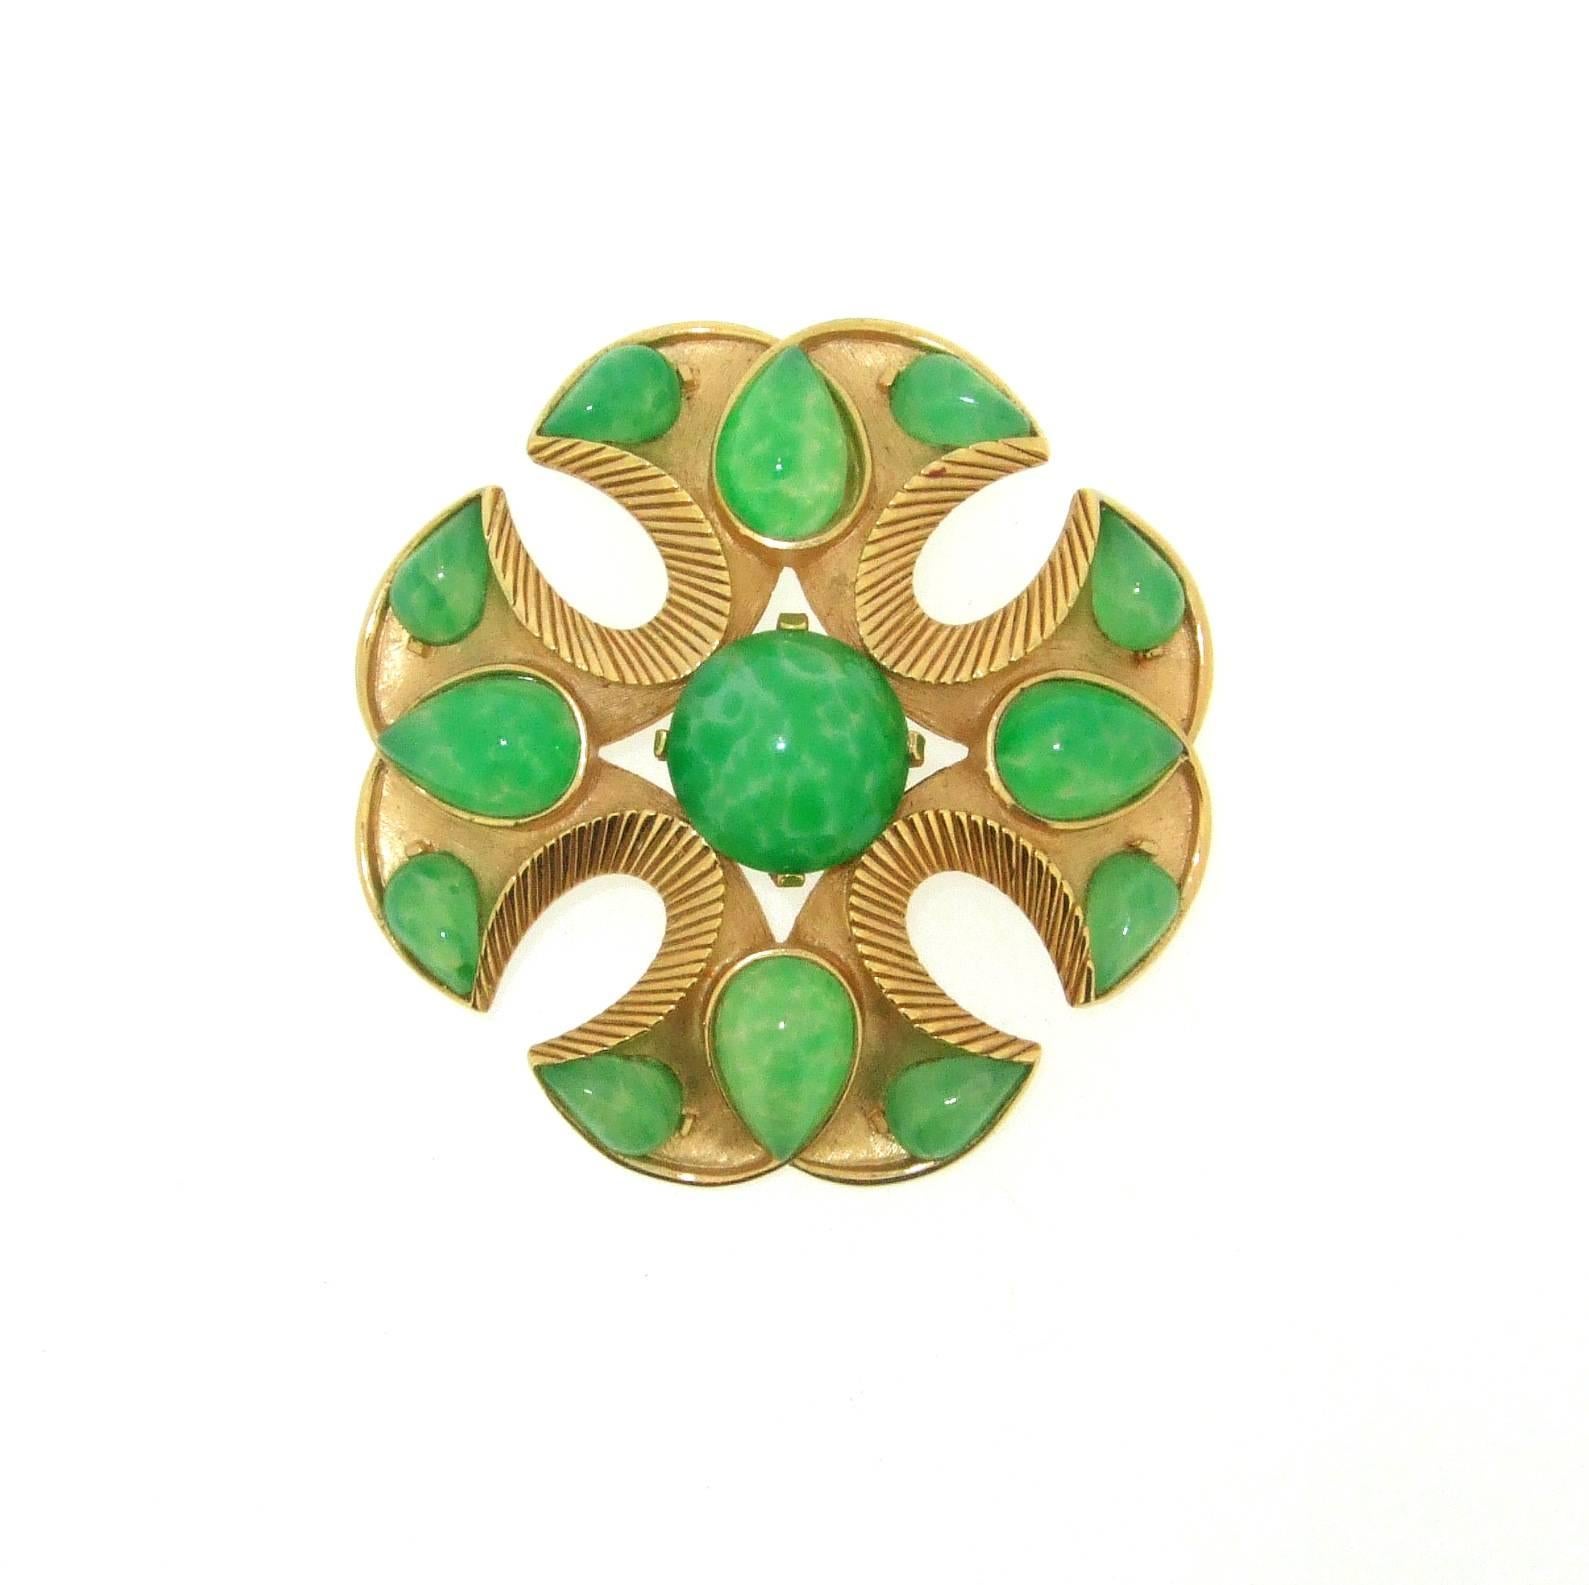 1965 Trifari Brooch Jade Glass Jewels of India Collection